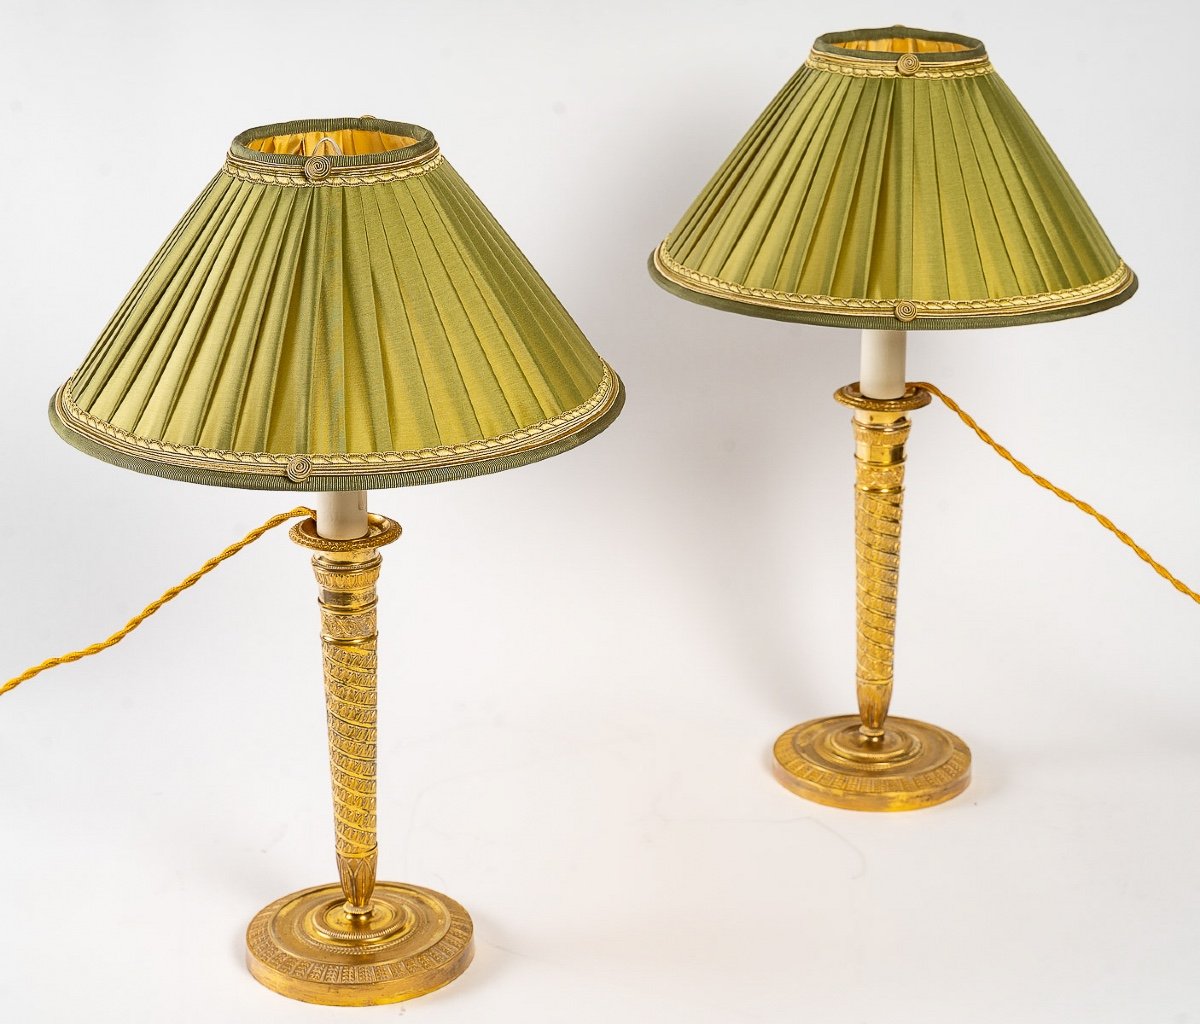 Pair Of Candlesticks In Gilt Bronze Lamps Decorated With Heart Raises From The Directoire Period-photo-2